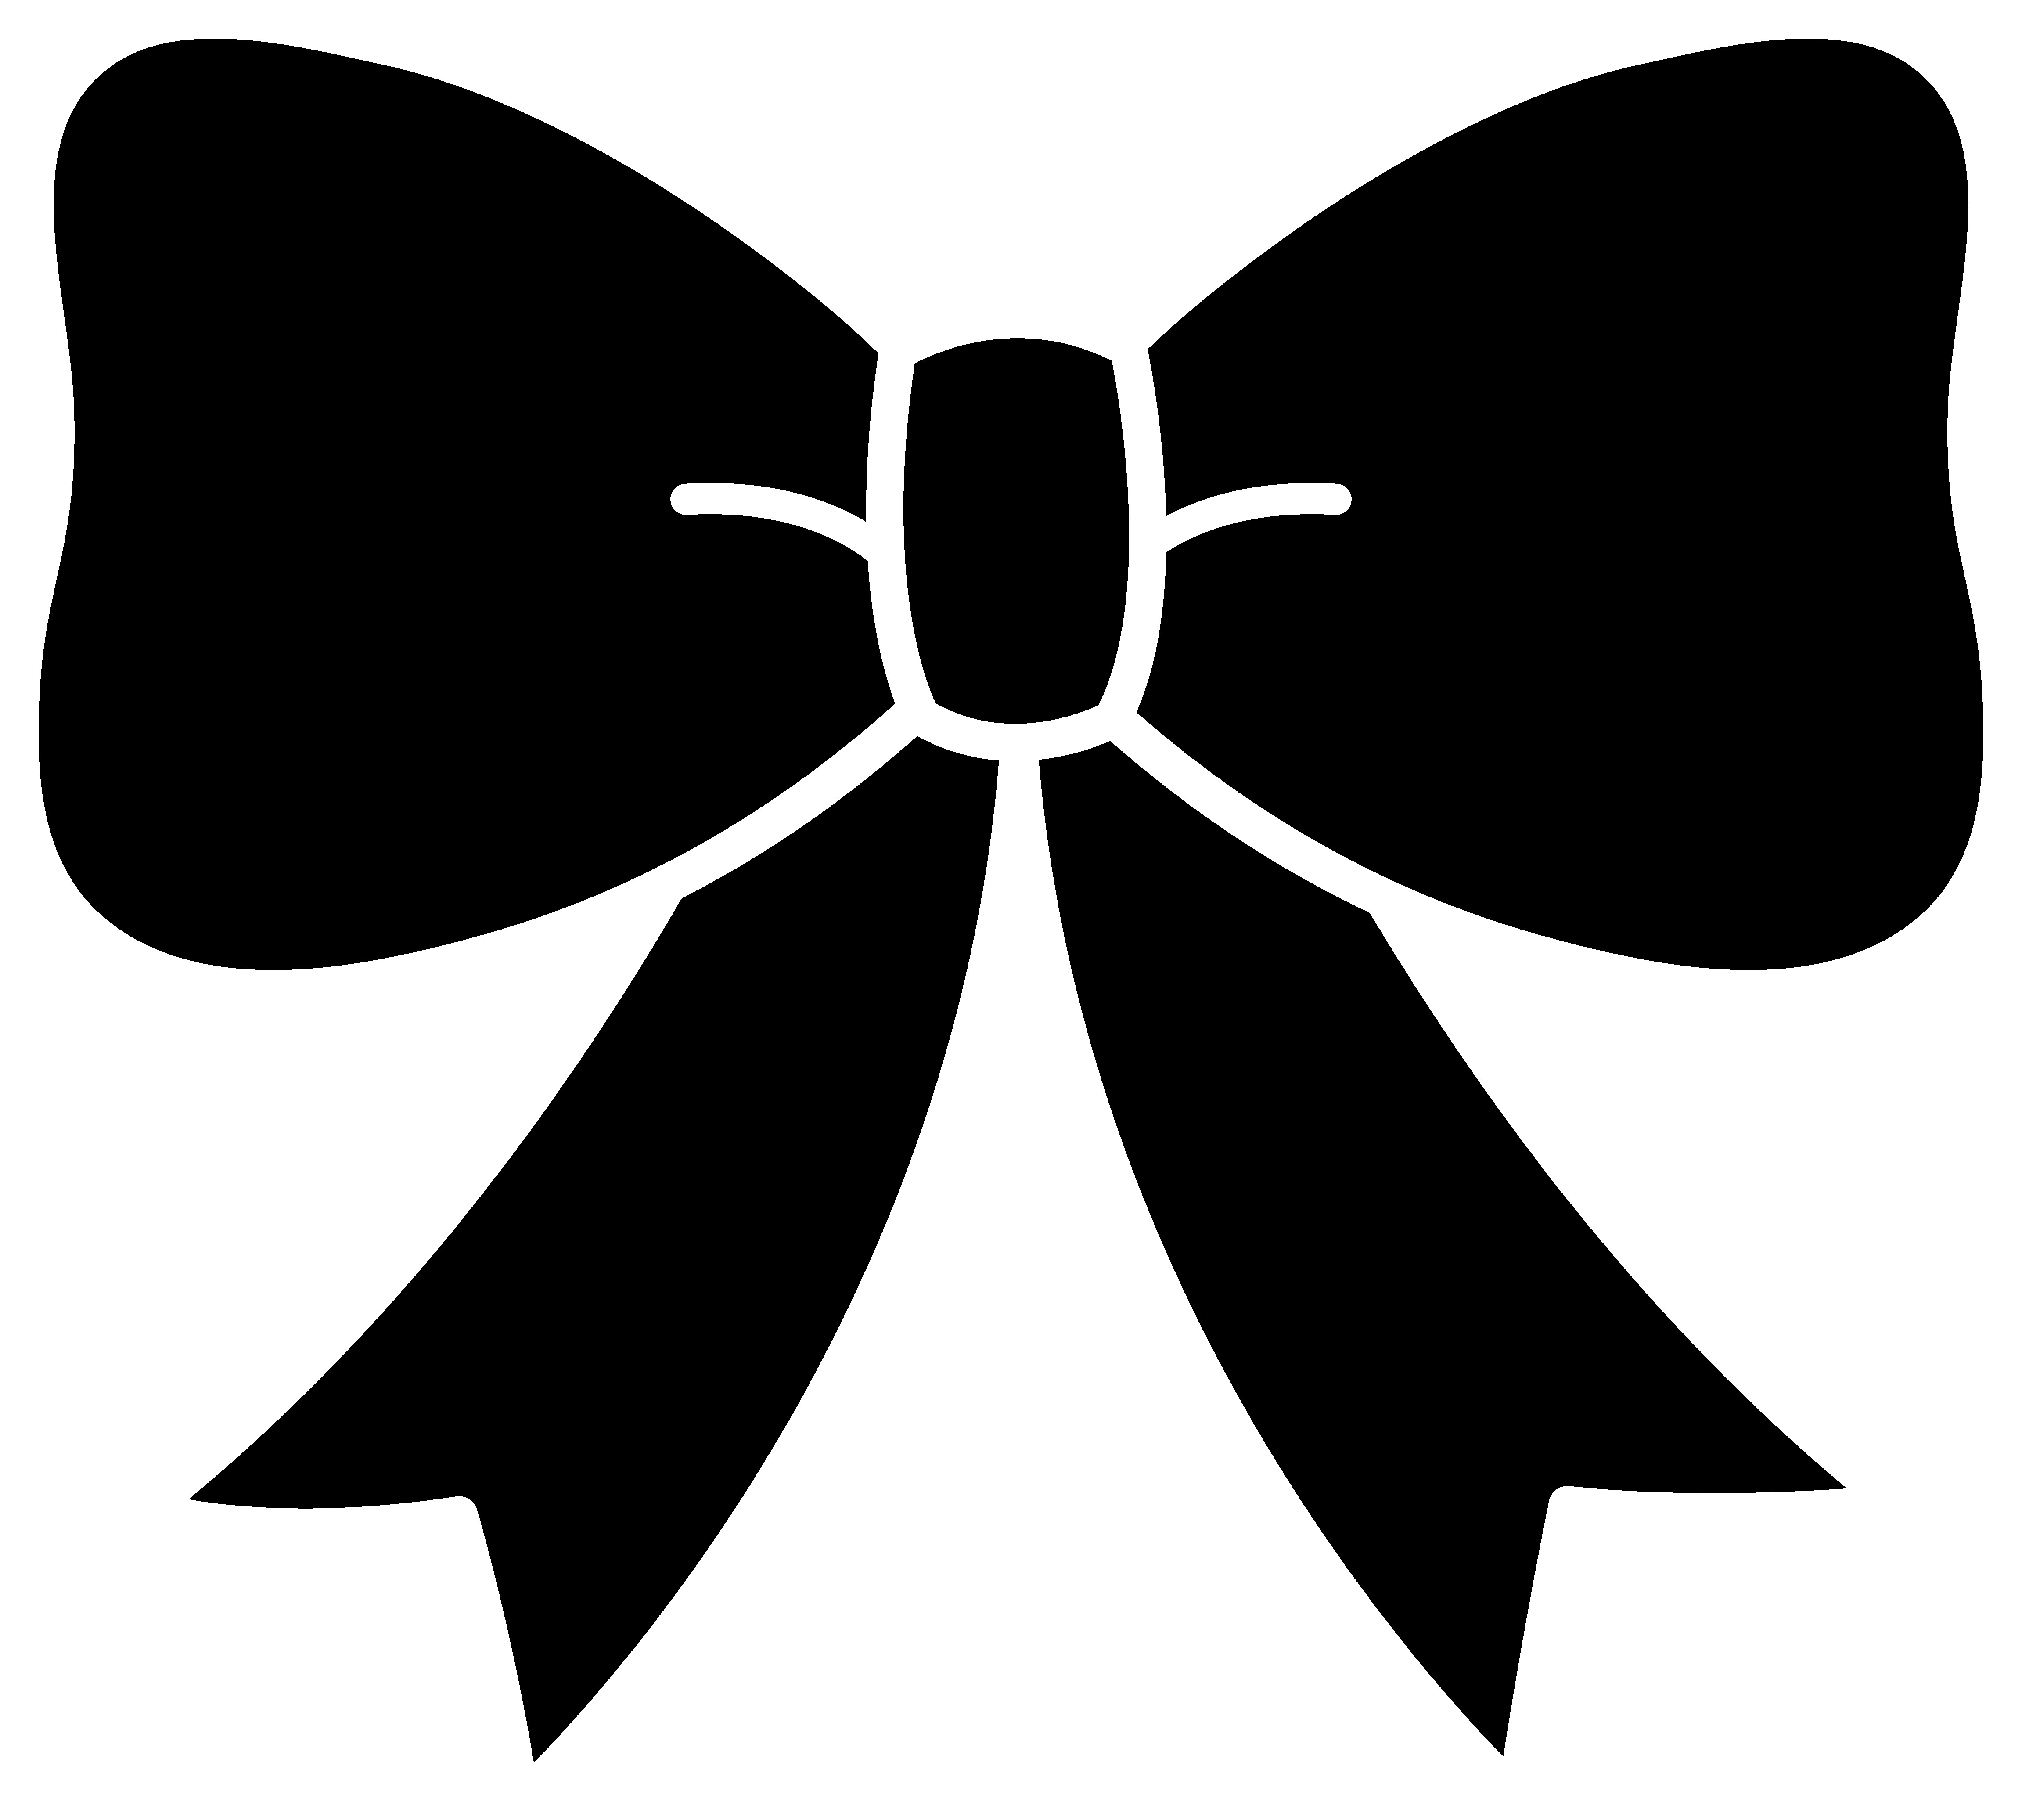 Rescuedesk me . Bows clipart hair bow